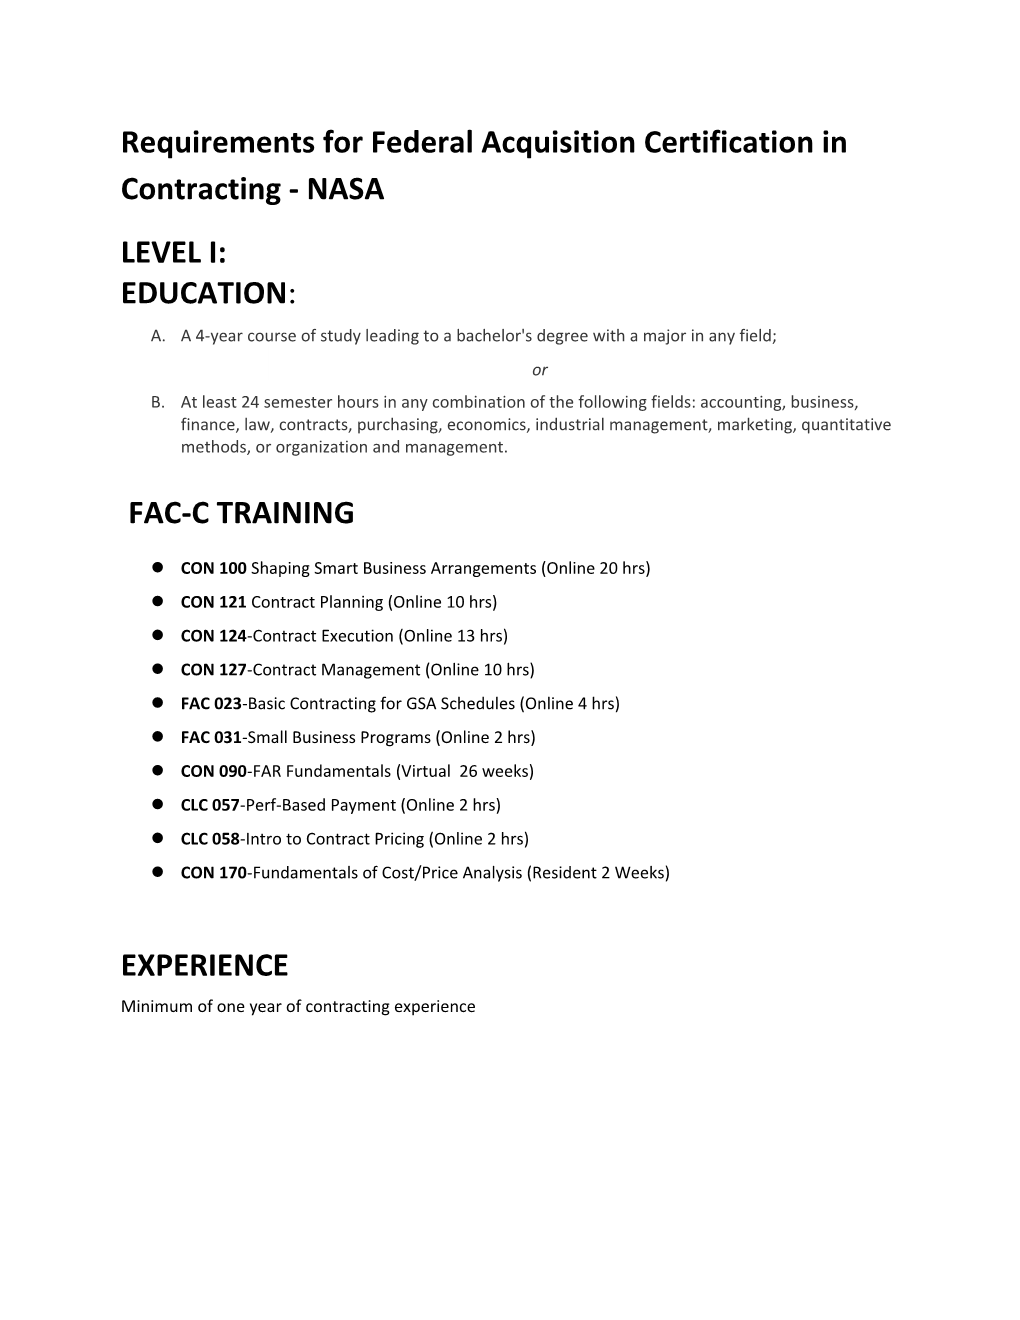 Requirements for Federal Acquisition Certification in Contracting - NASA